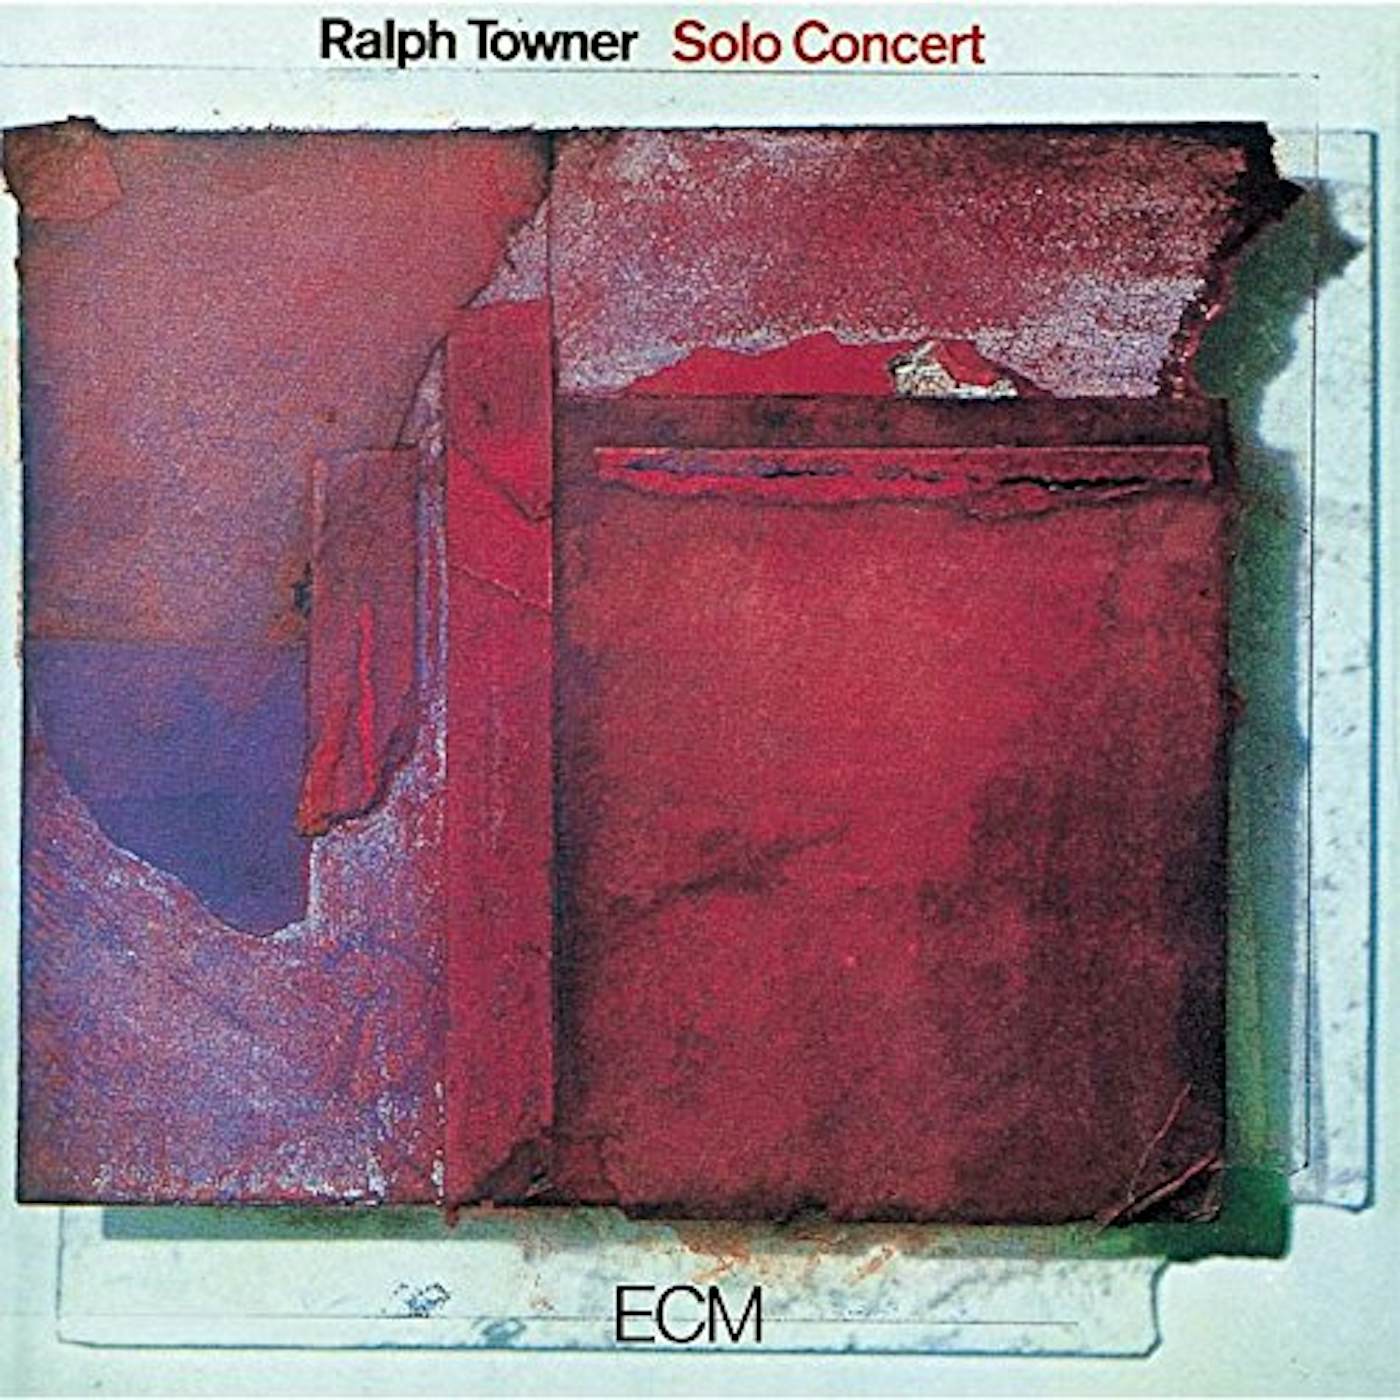 Ralph Towner SOLO CONCERT CD